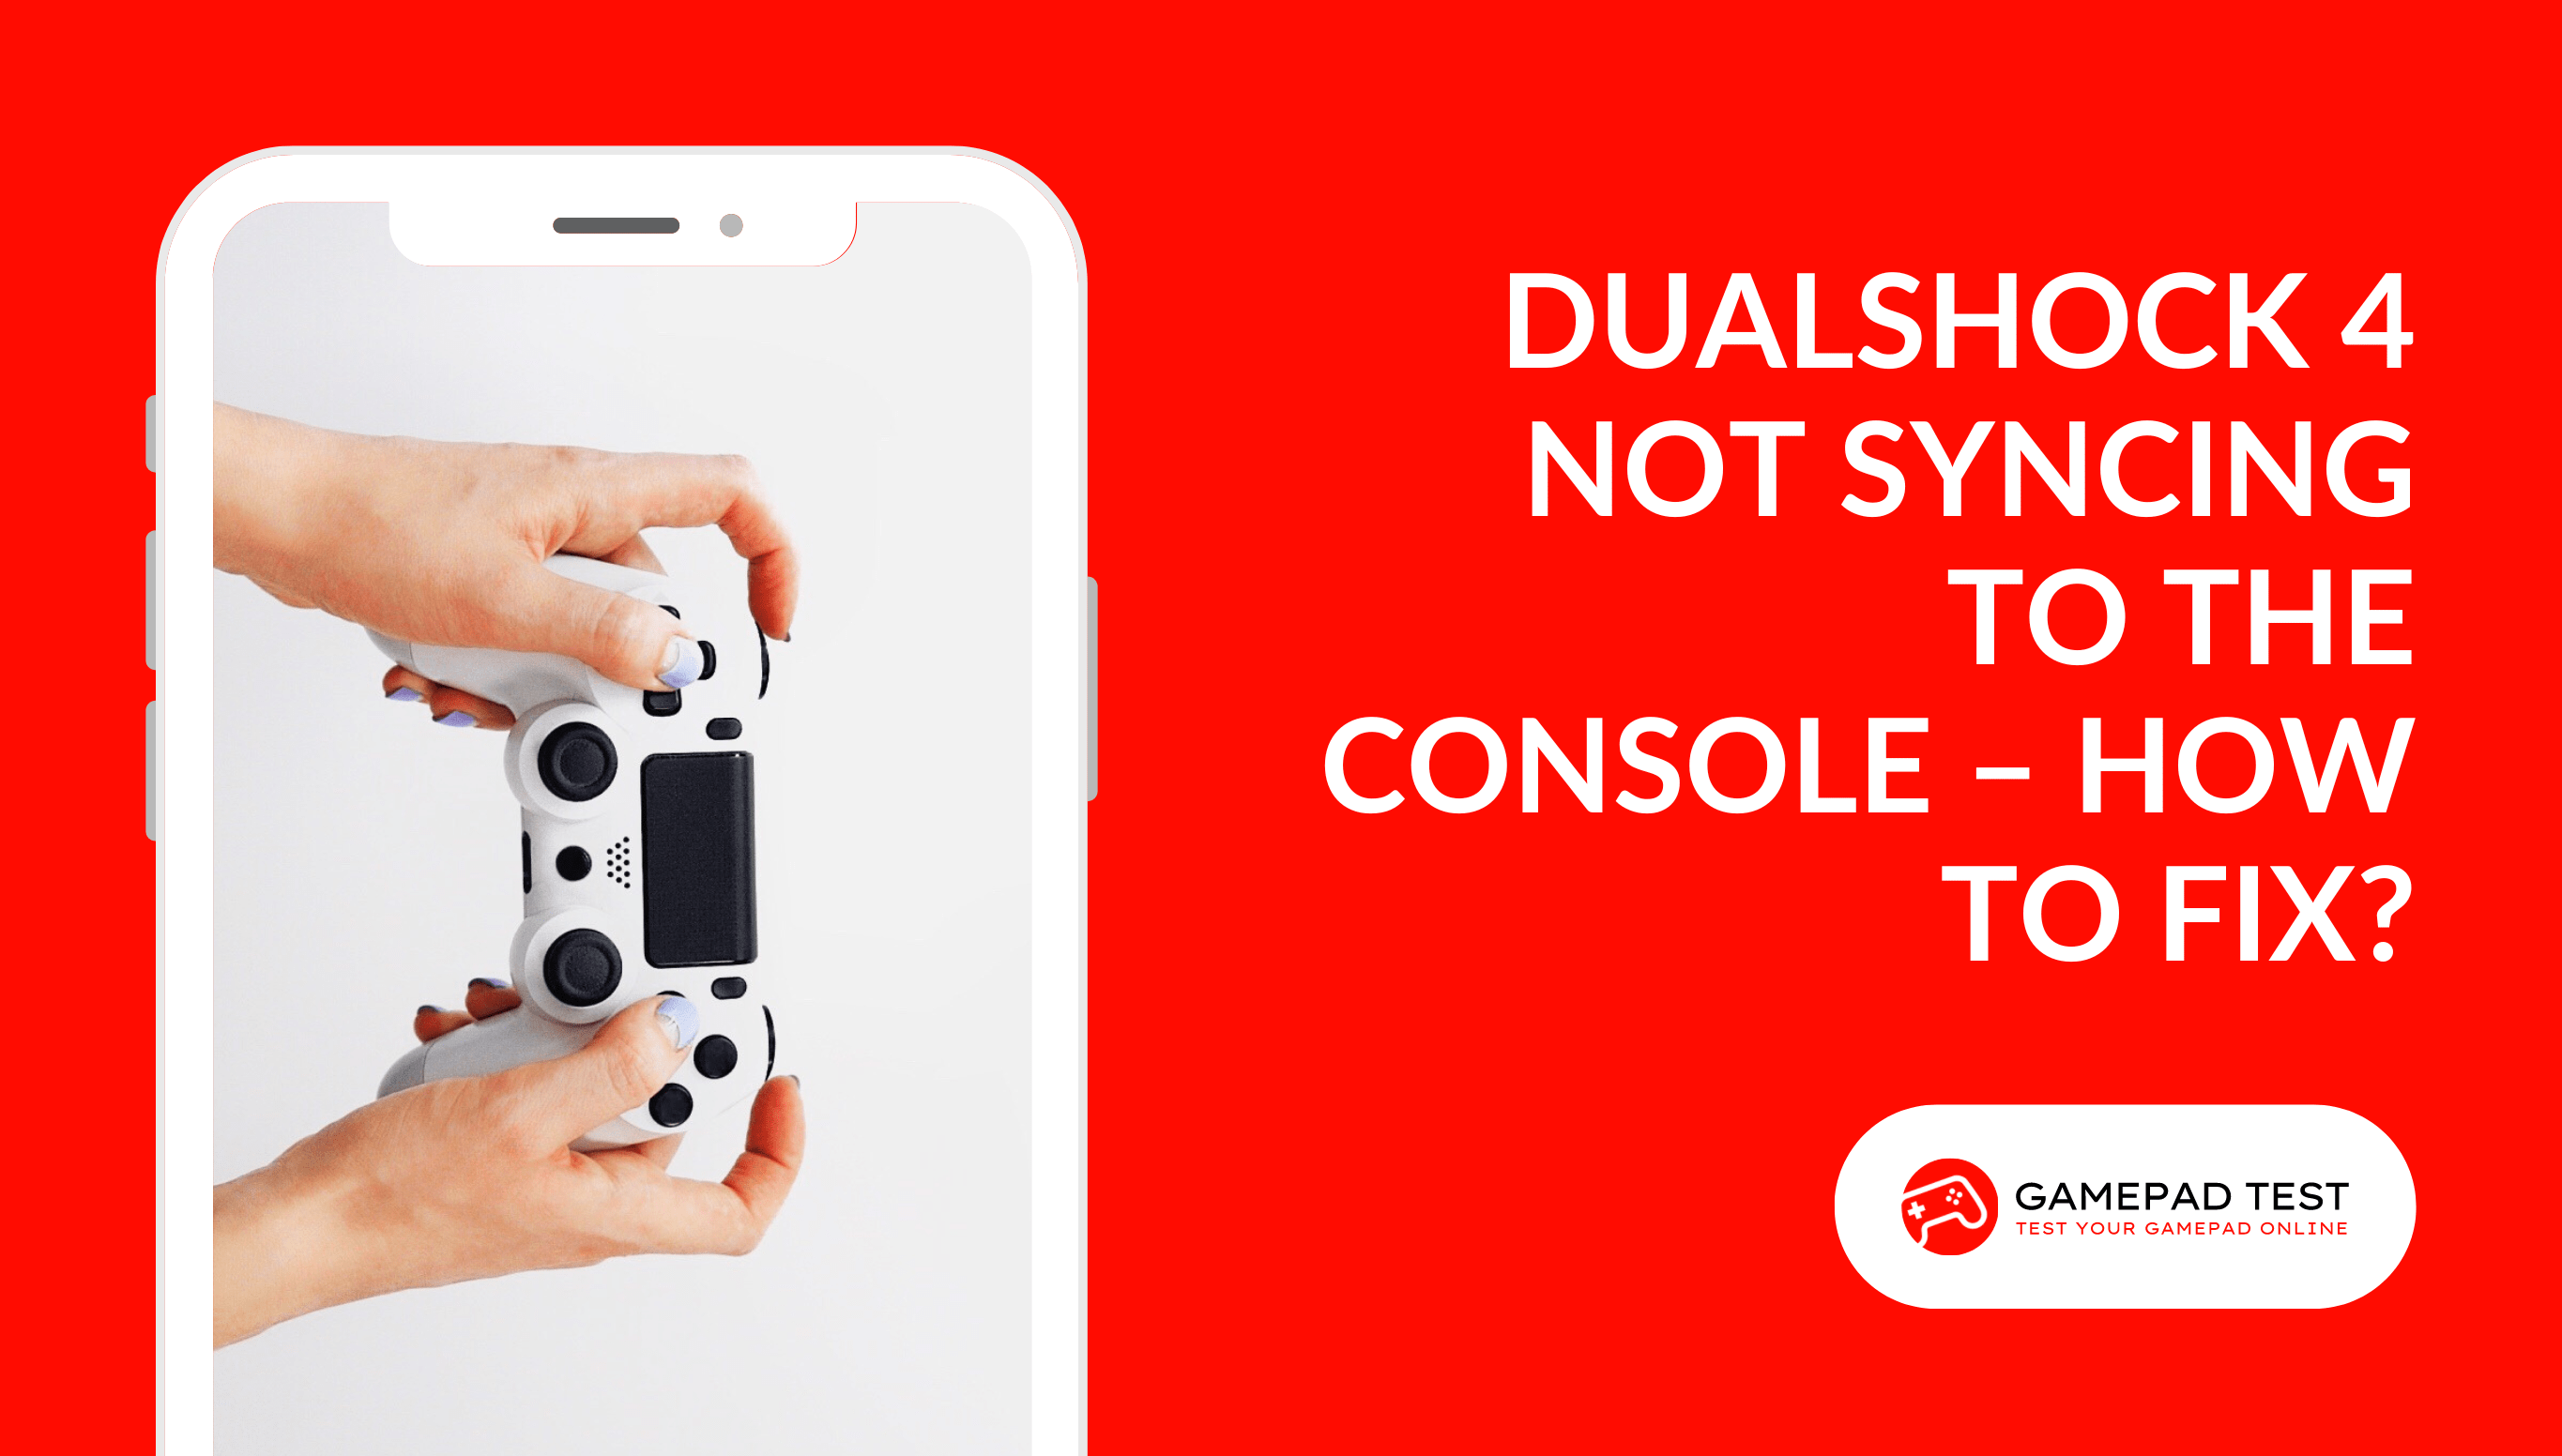 DualShock 4 Not Syncing to the Console – How to Fix - Blog Featured Image - gamepadtest.com